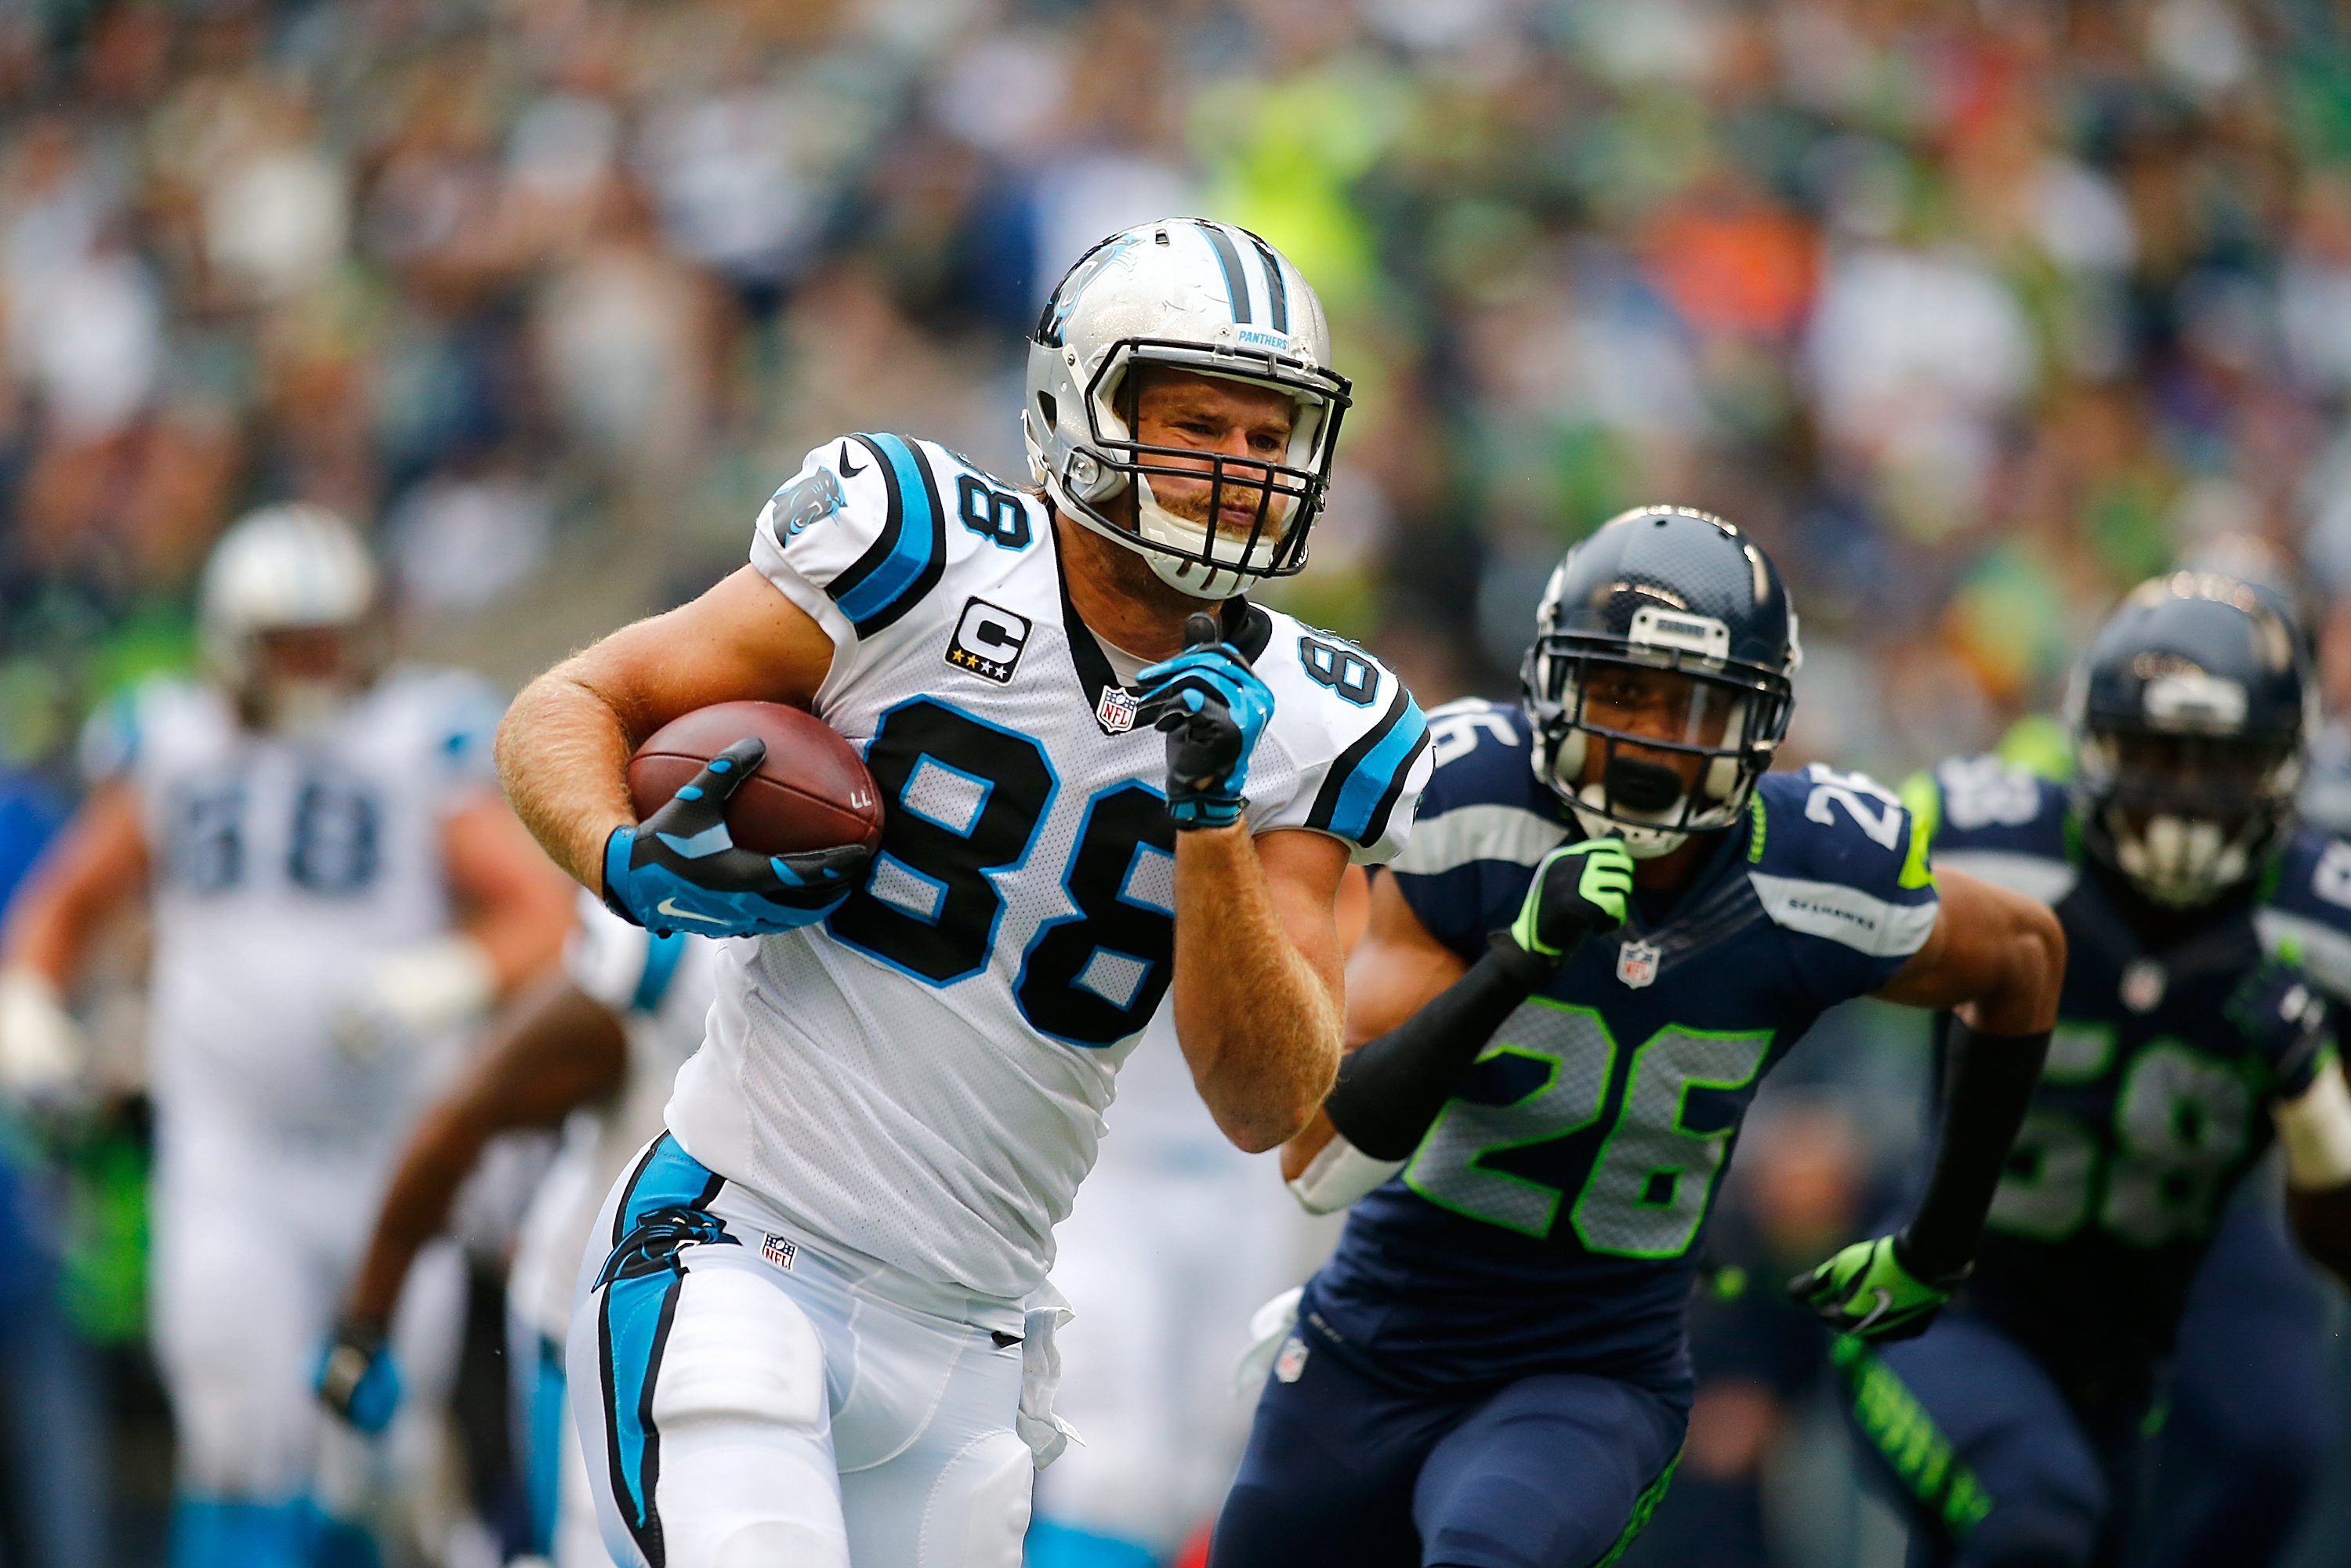 Panthers tight end Greg Olsen runs with the ball against the Seahawks at CenturyLink Field in Seattle on Oct. 18, 2015. (Photo by Jonathan Ferrey/Getty Images)